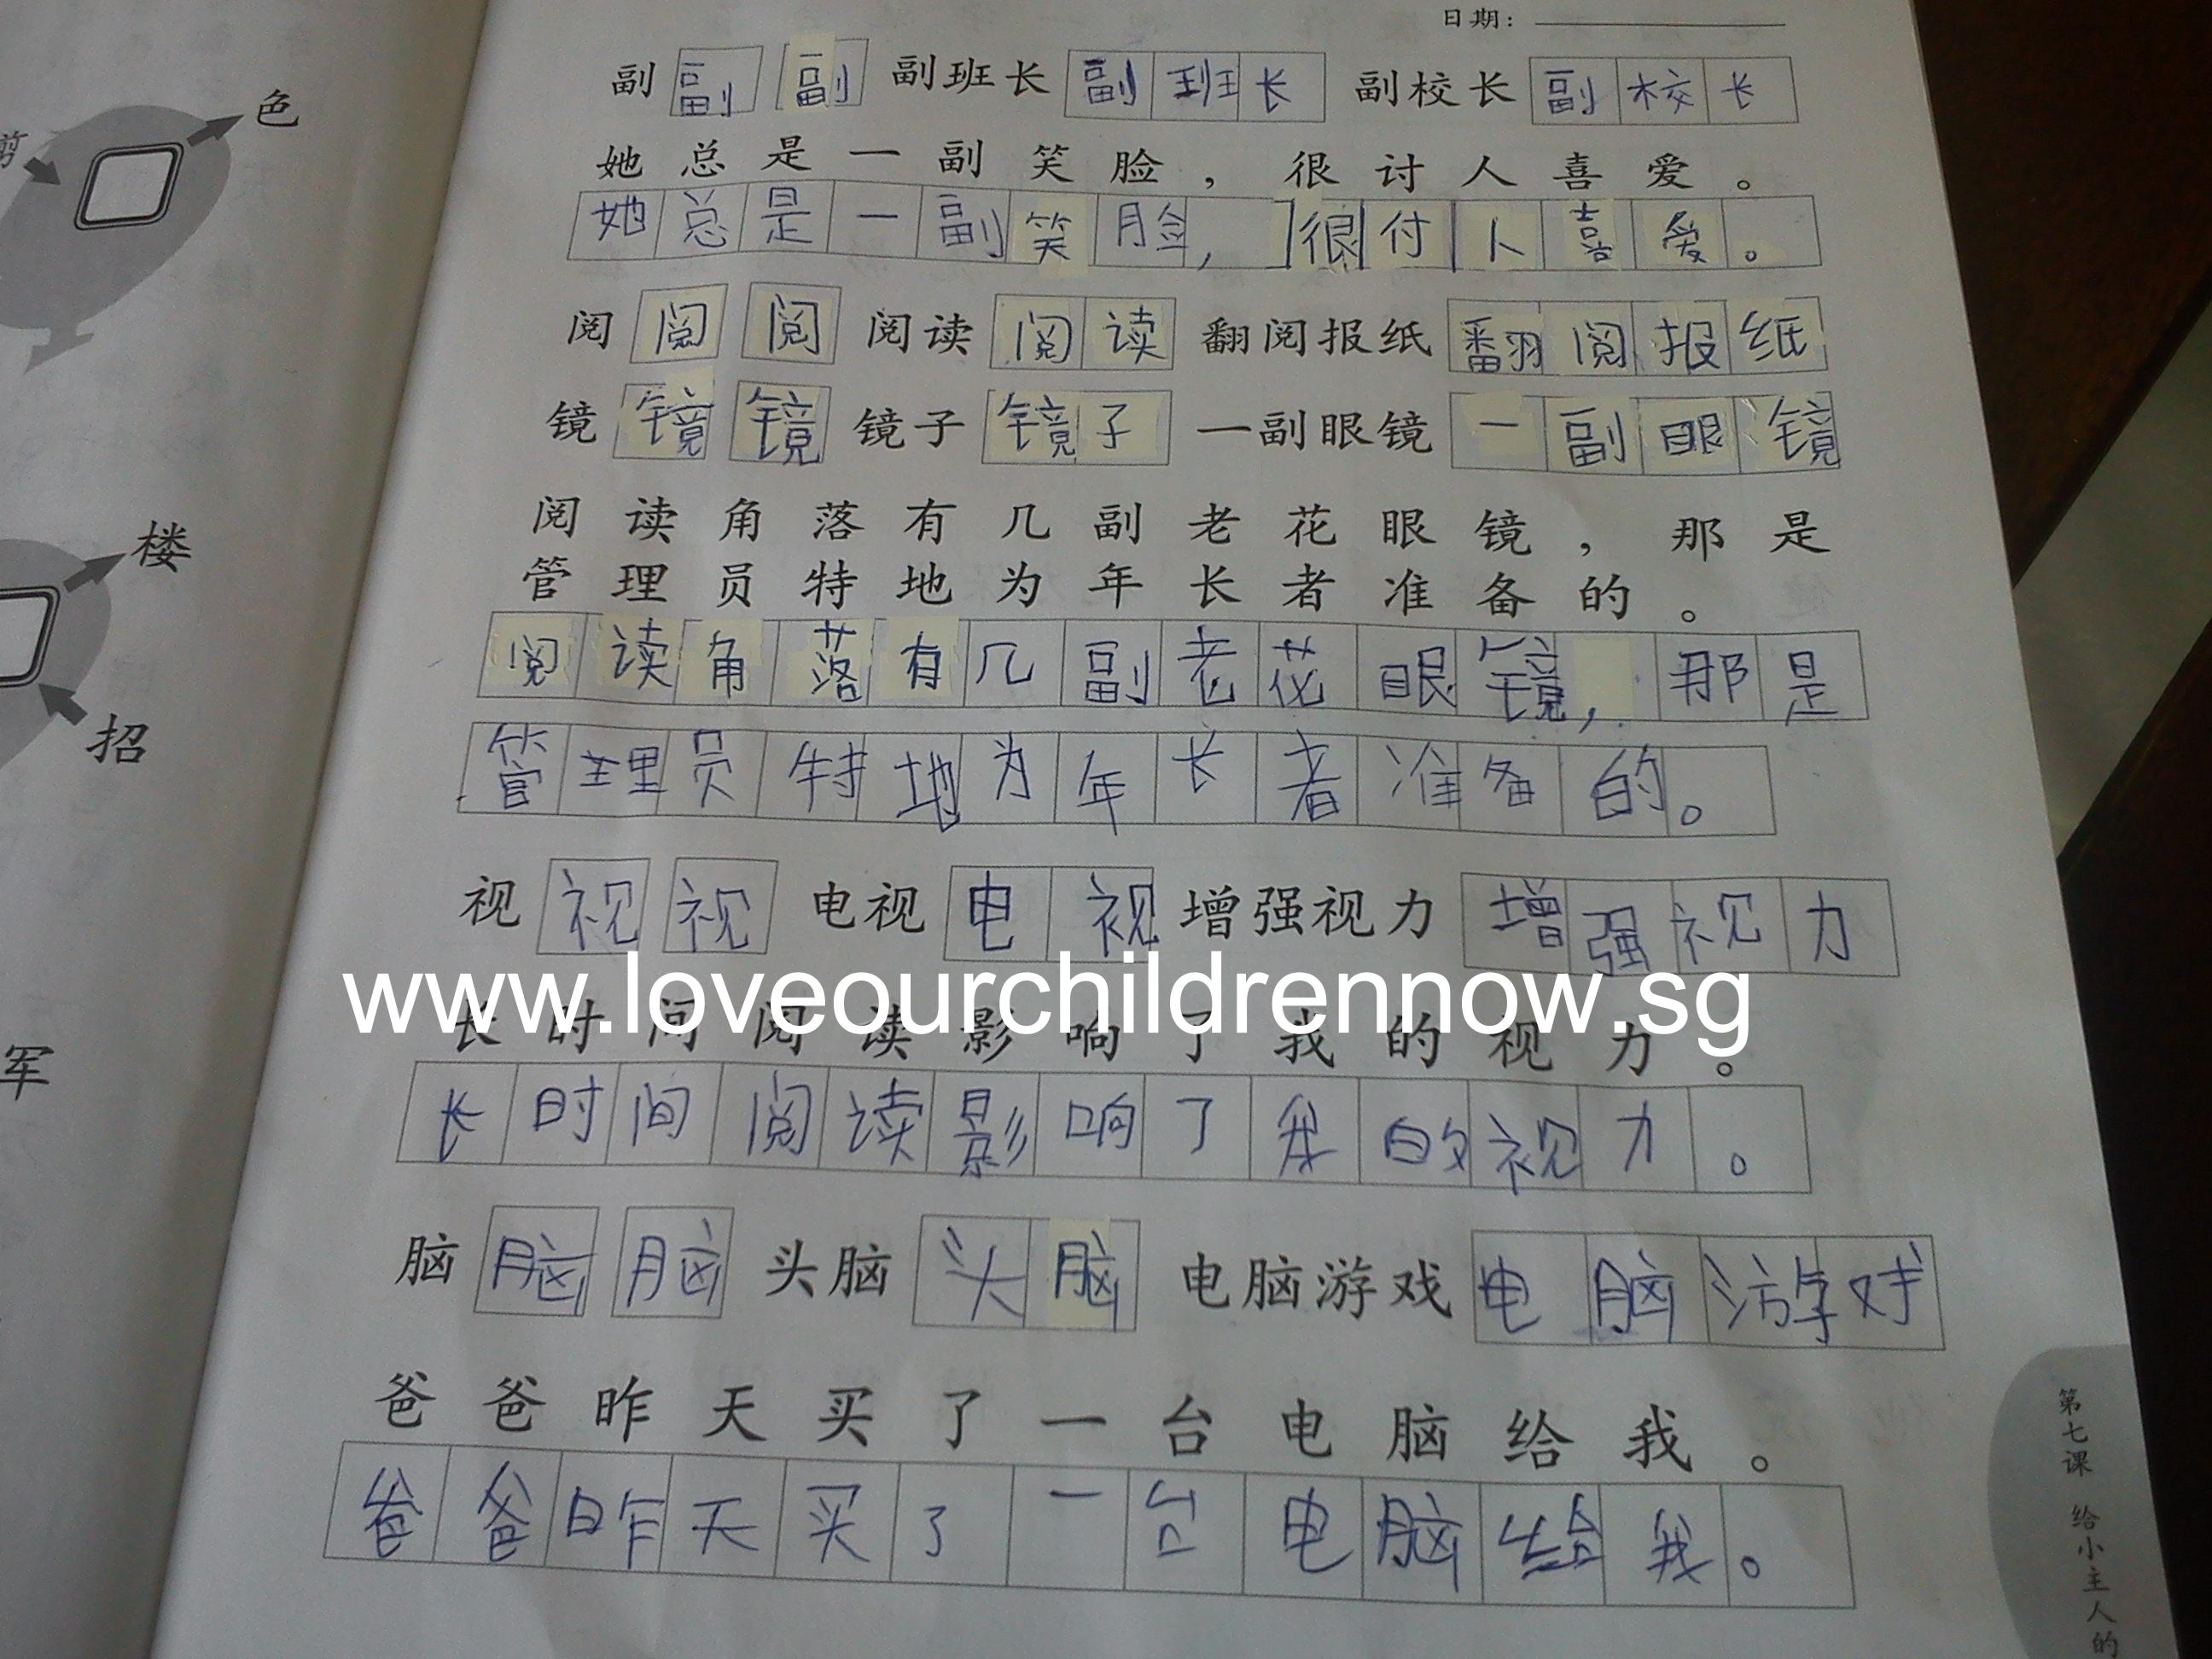 I love this handwriting workbook I found.It can keep him productively occupied for hours! ;)